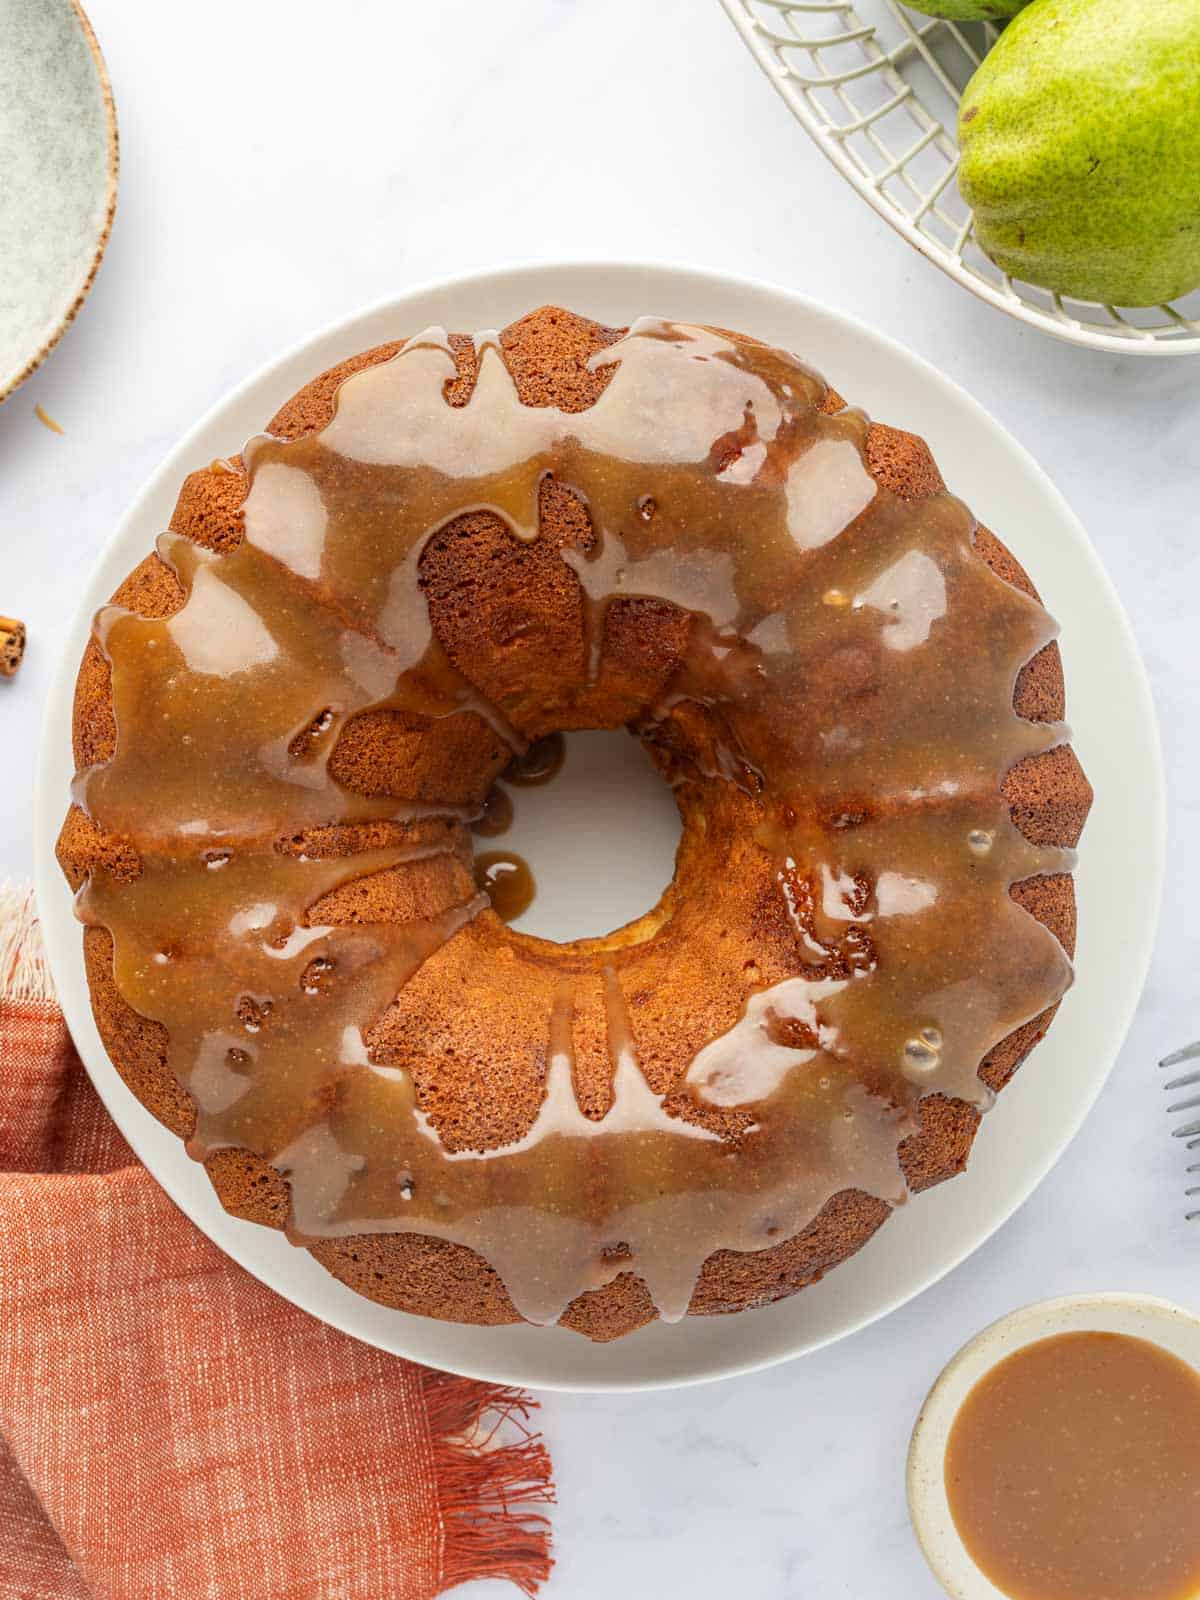 Caramel drizzled over pear bundt cake.